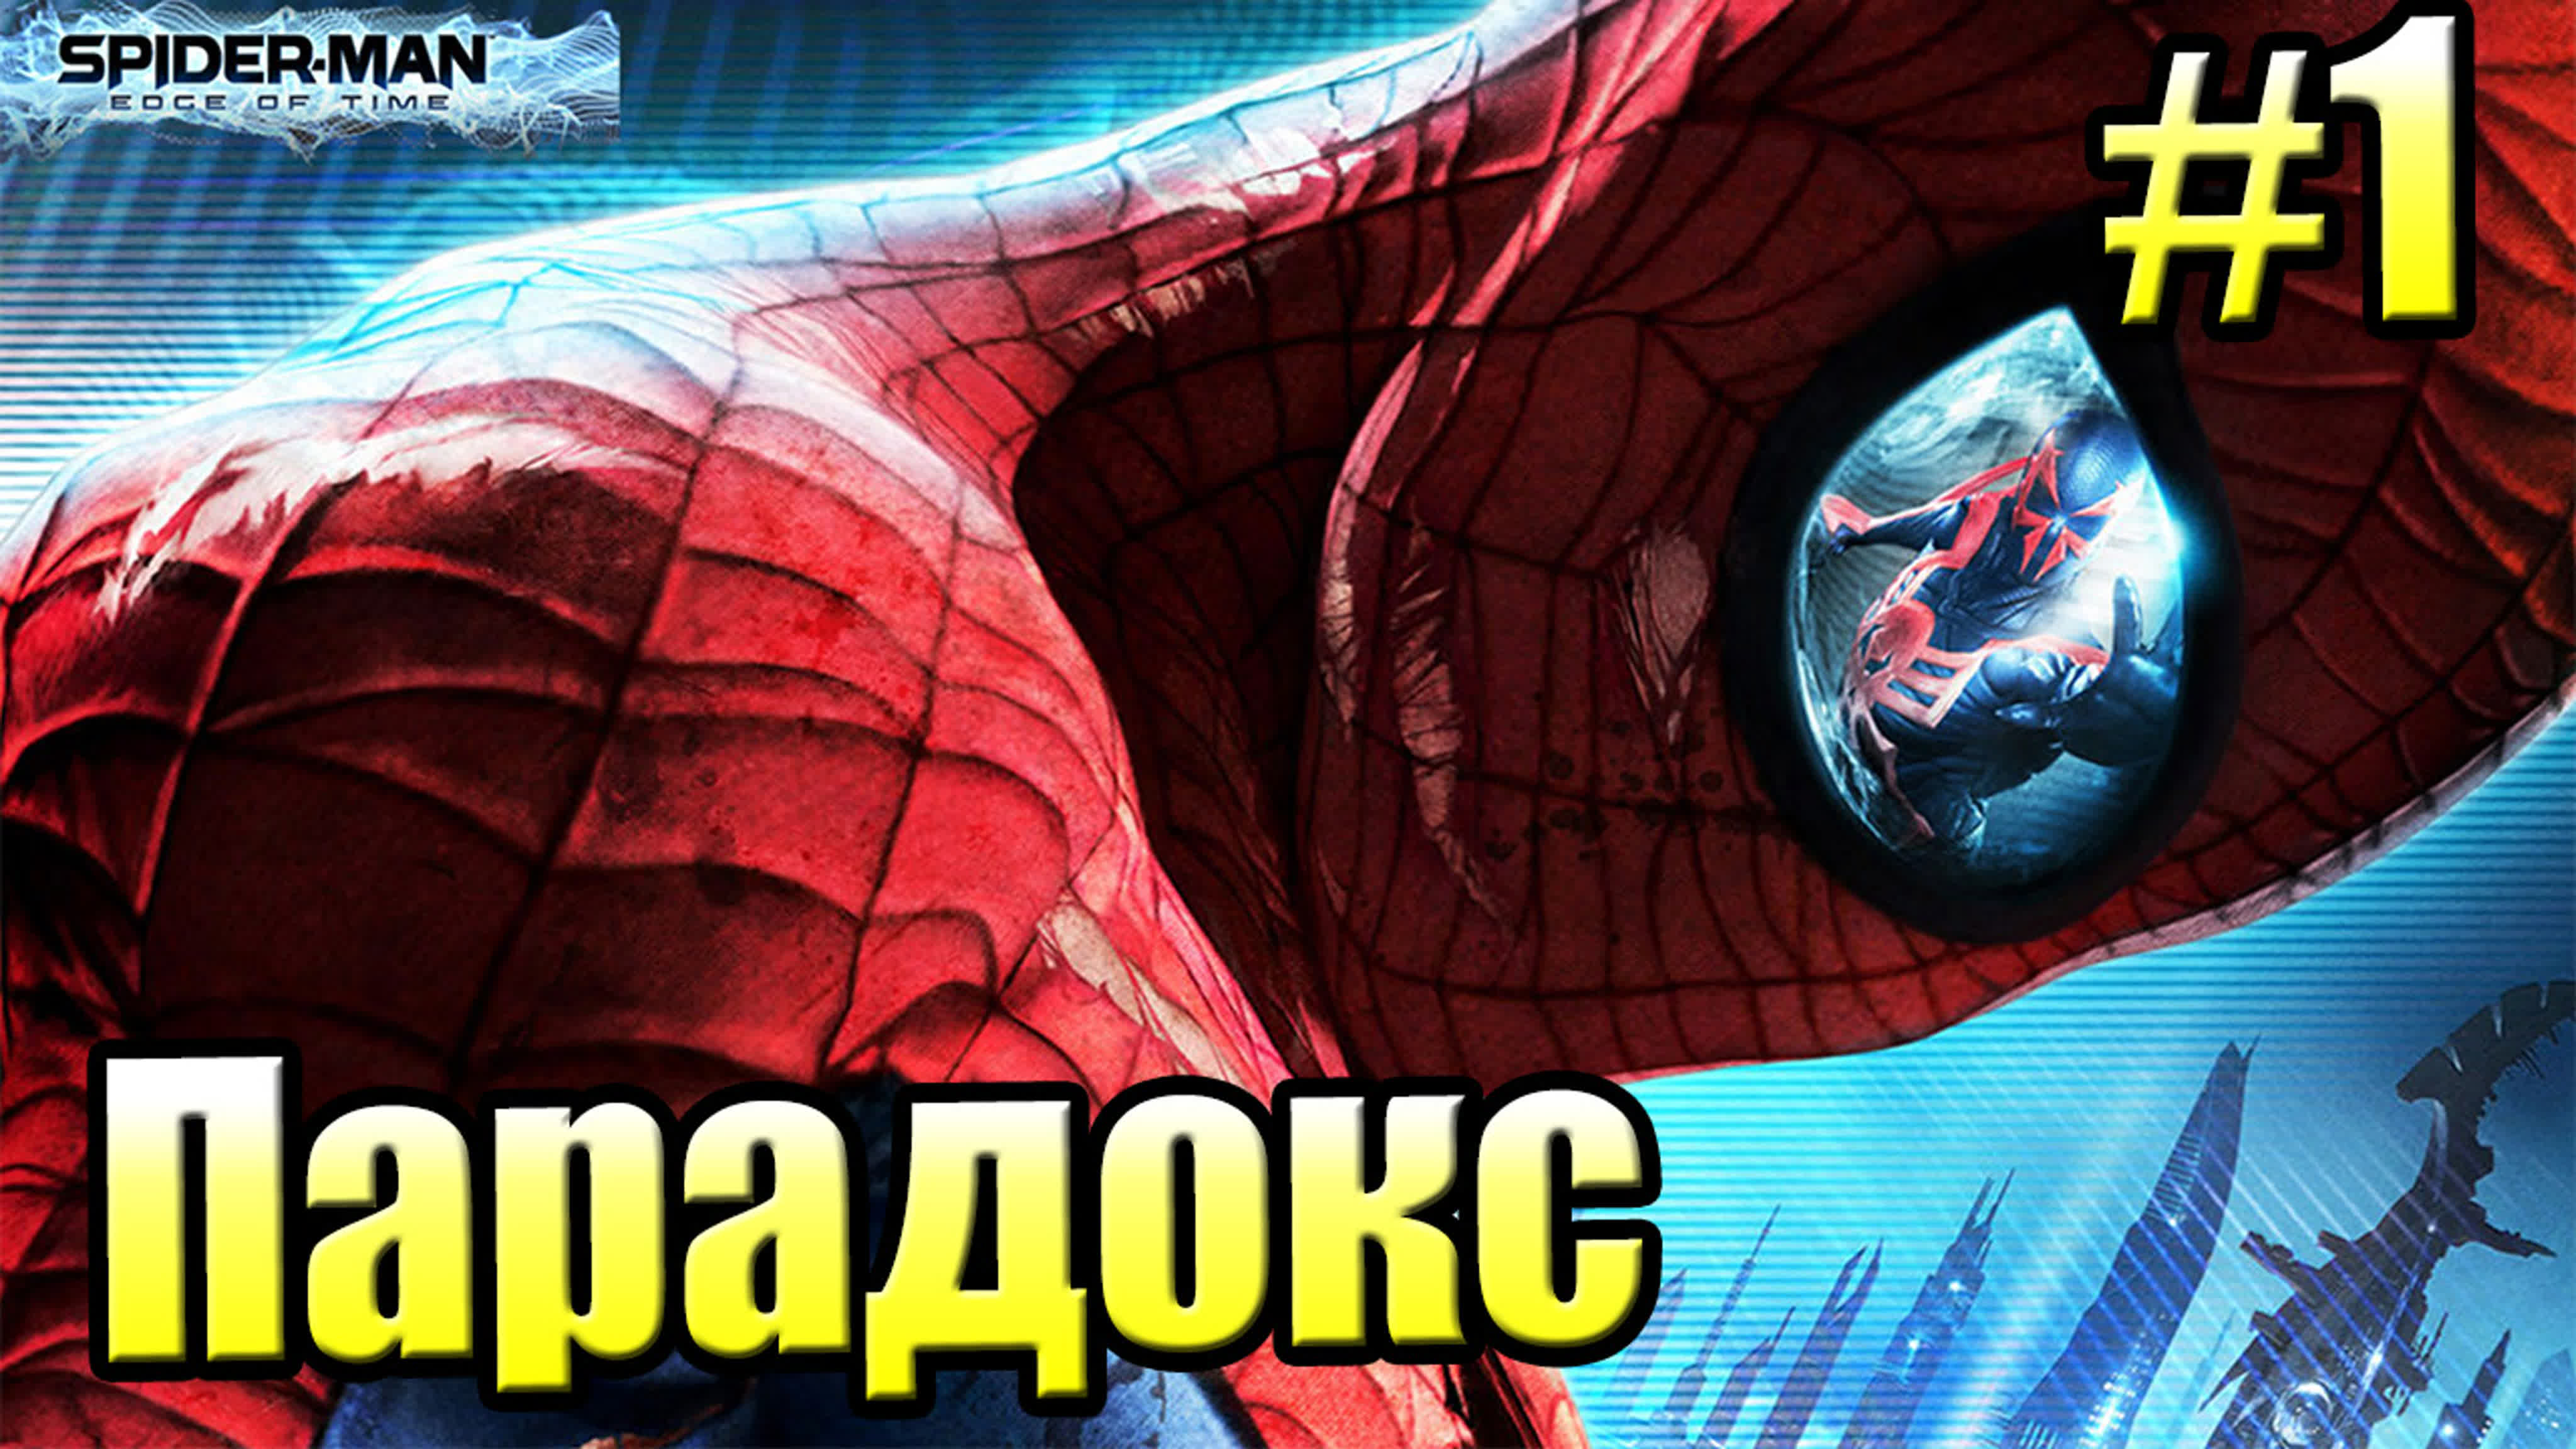 Spider-Man Edge of Time (Xbox 360)